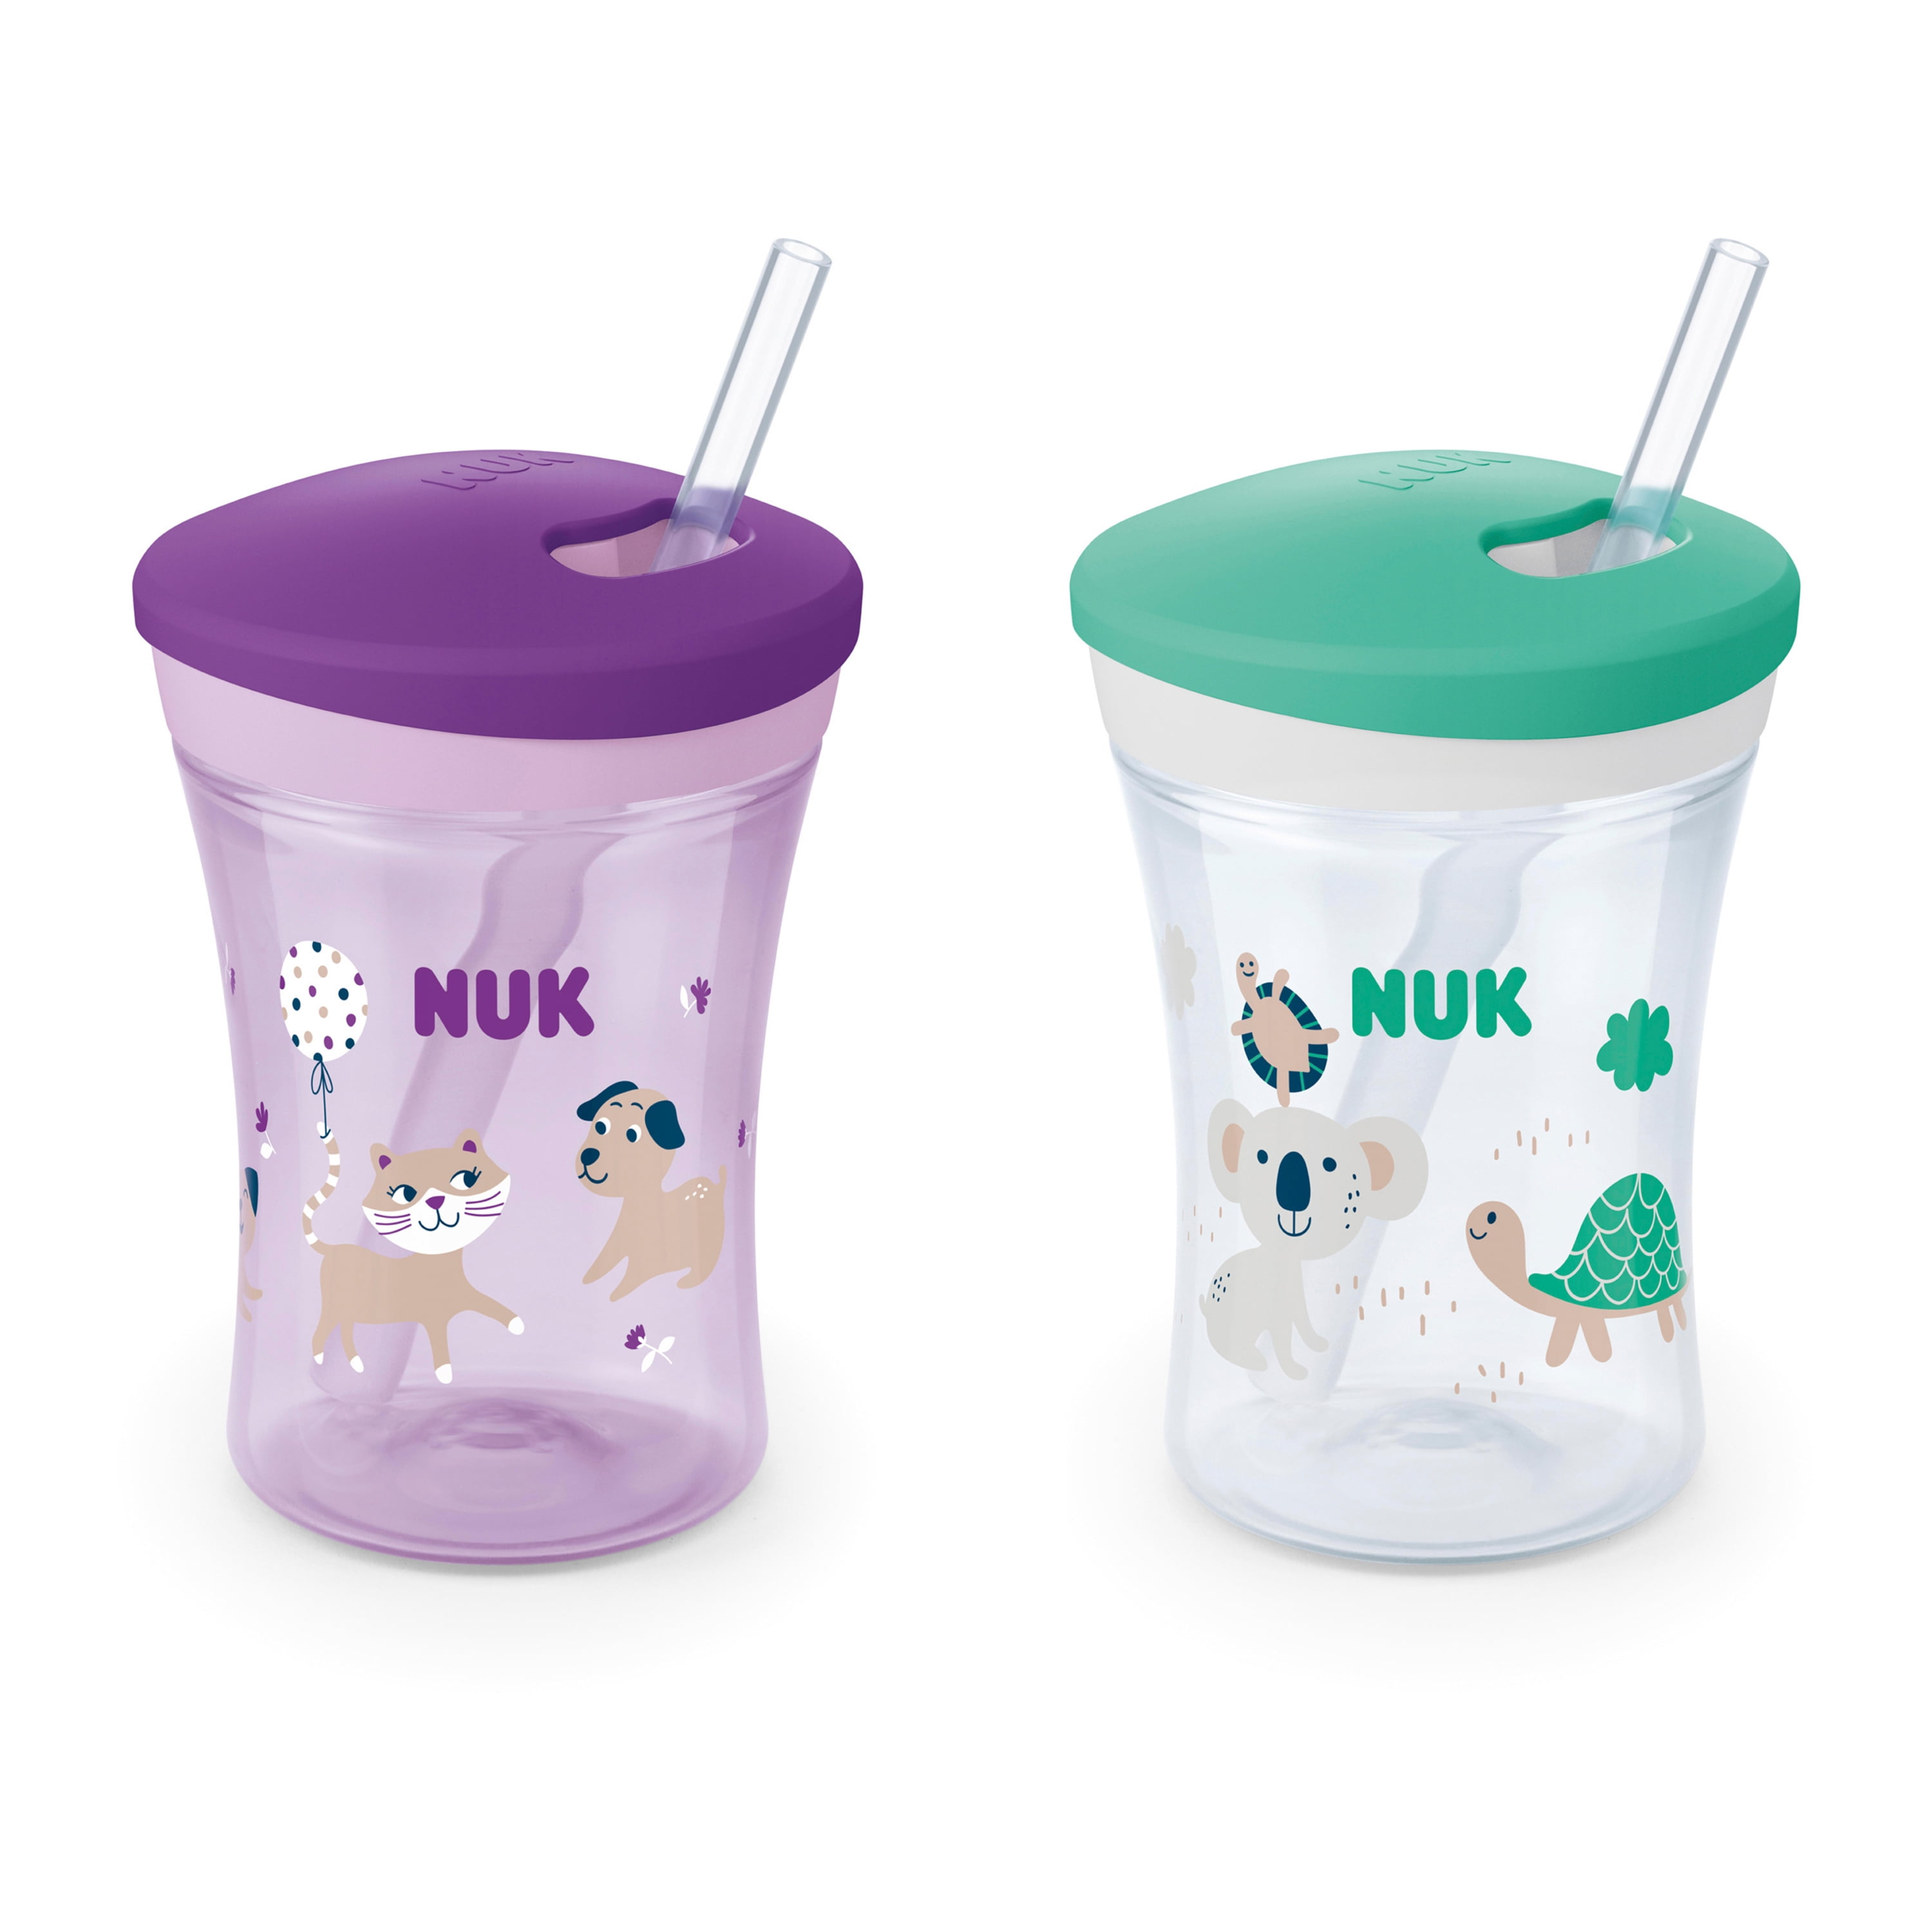 NUK Action Toddler Cup 12 Months Twist Close Soft Drinking Straw Leak proof! 